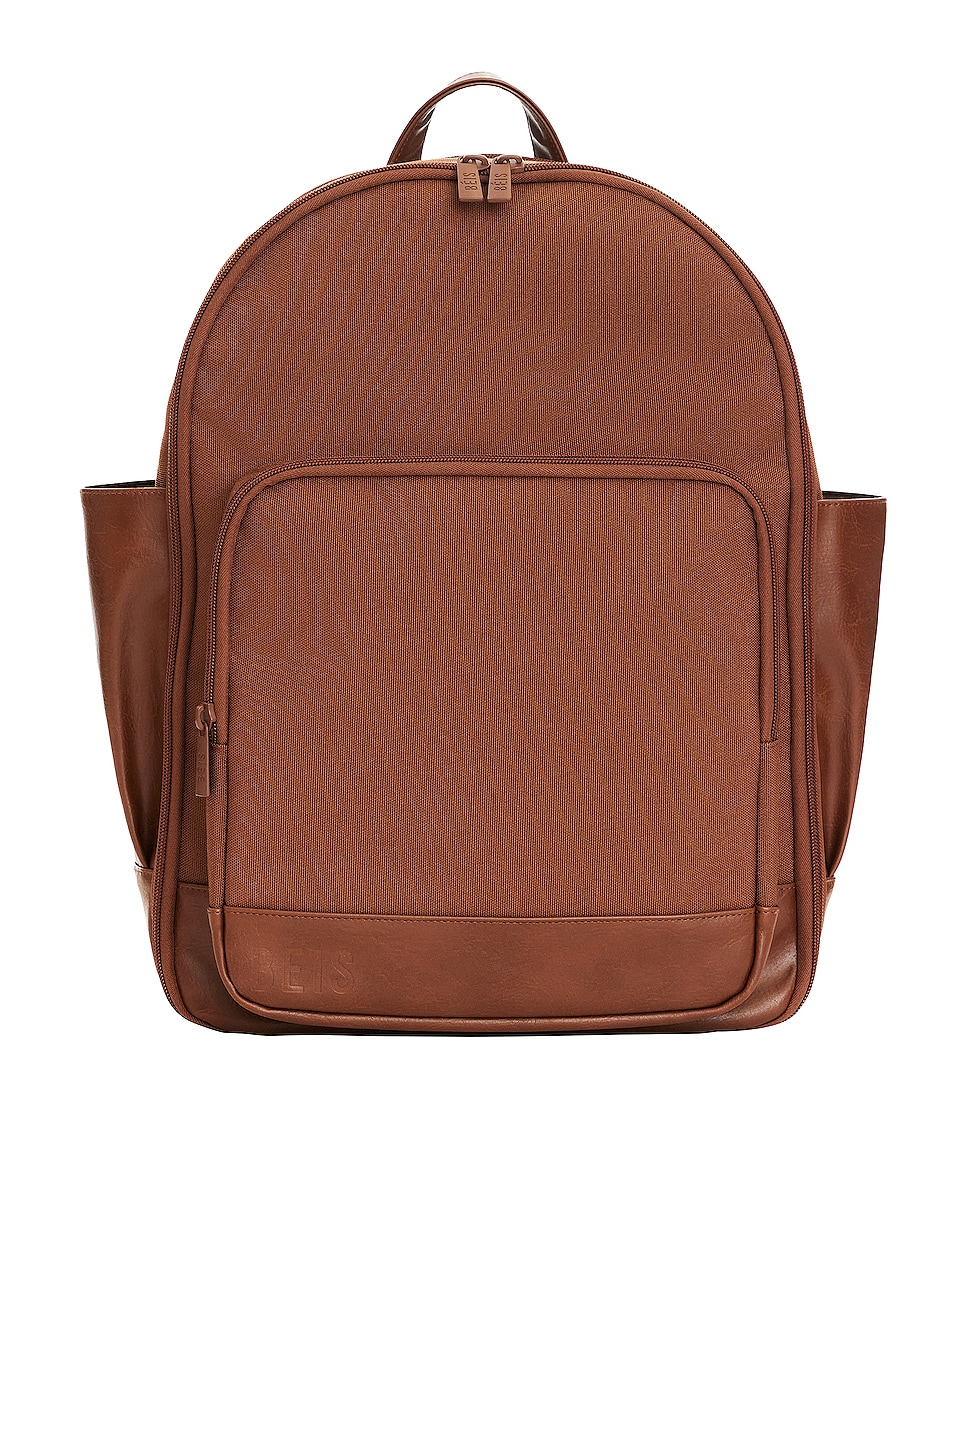 Image 1 of The Backpack in Maple